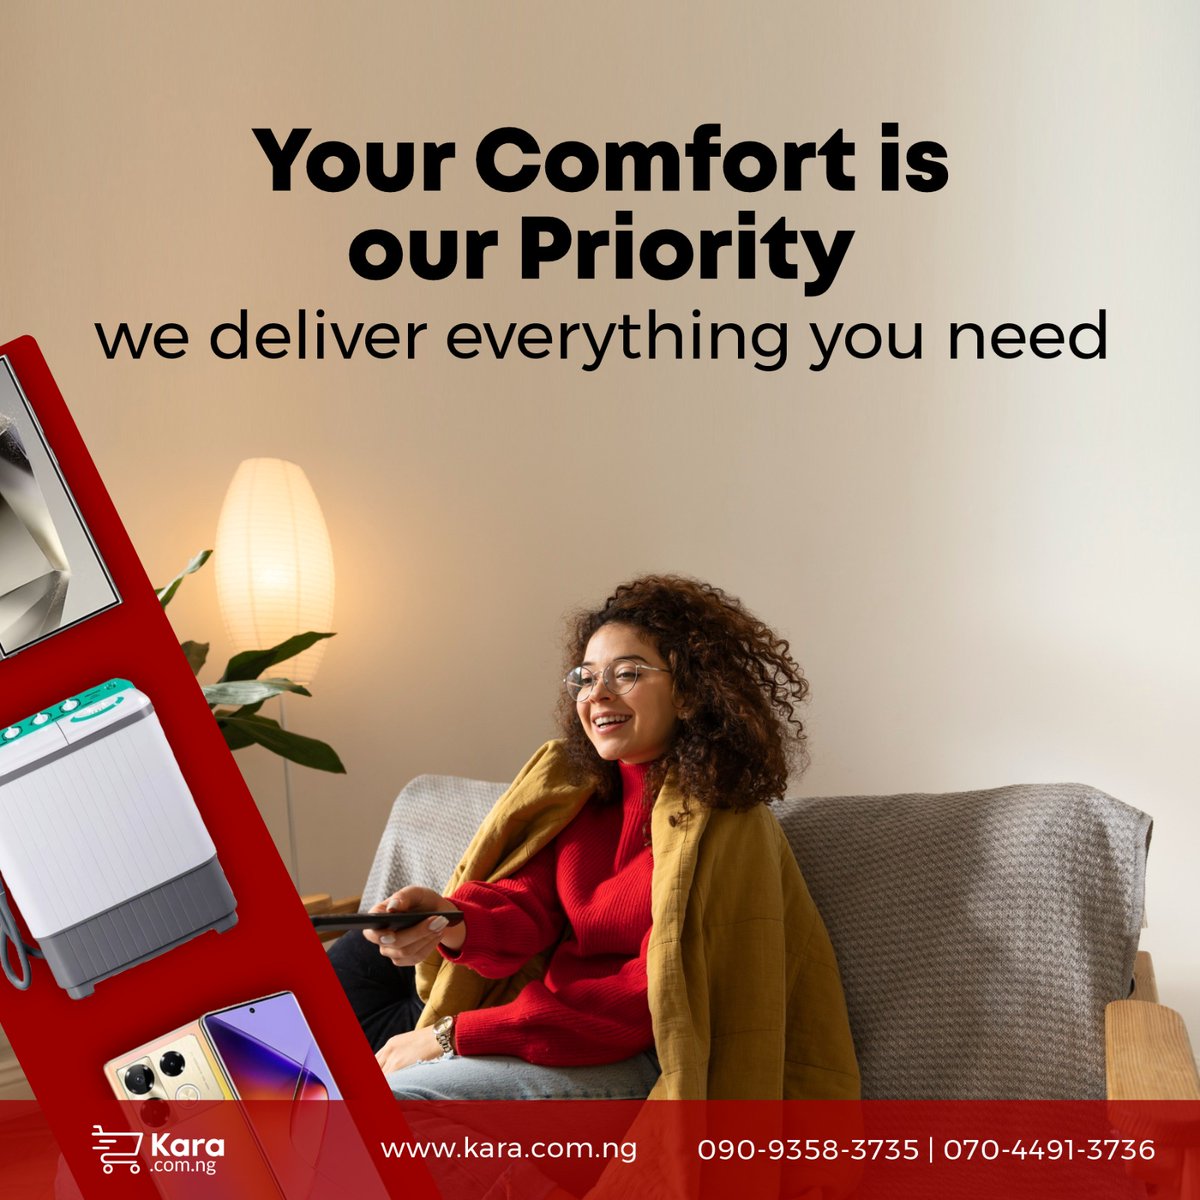 We understand how important your comfort is, and we want you to know that it is our top priority. Our aim is to deliver everything you need so that you can feel at ease and taken care of.
 
Visit our website ( link in bio ) today 😍

#KaraNigeria #MobilePhones #WashingMachines